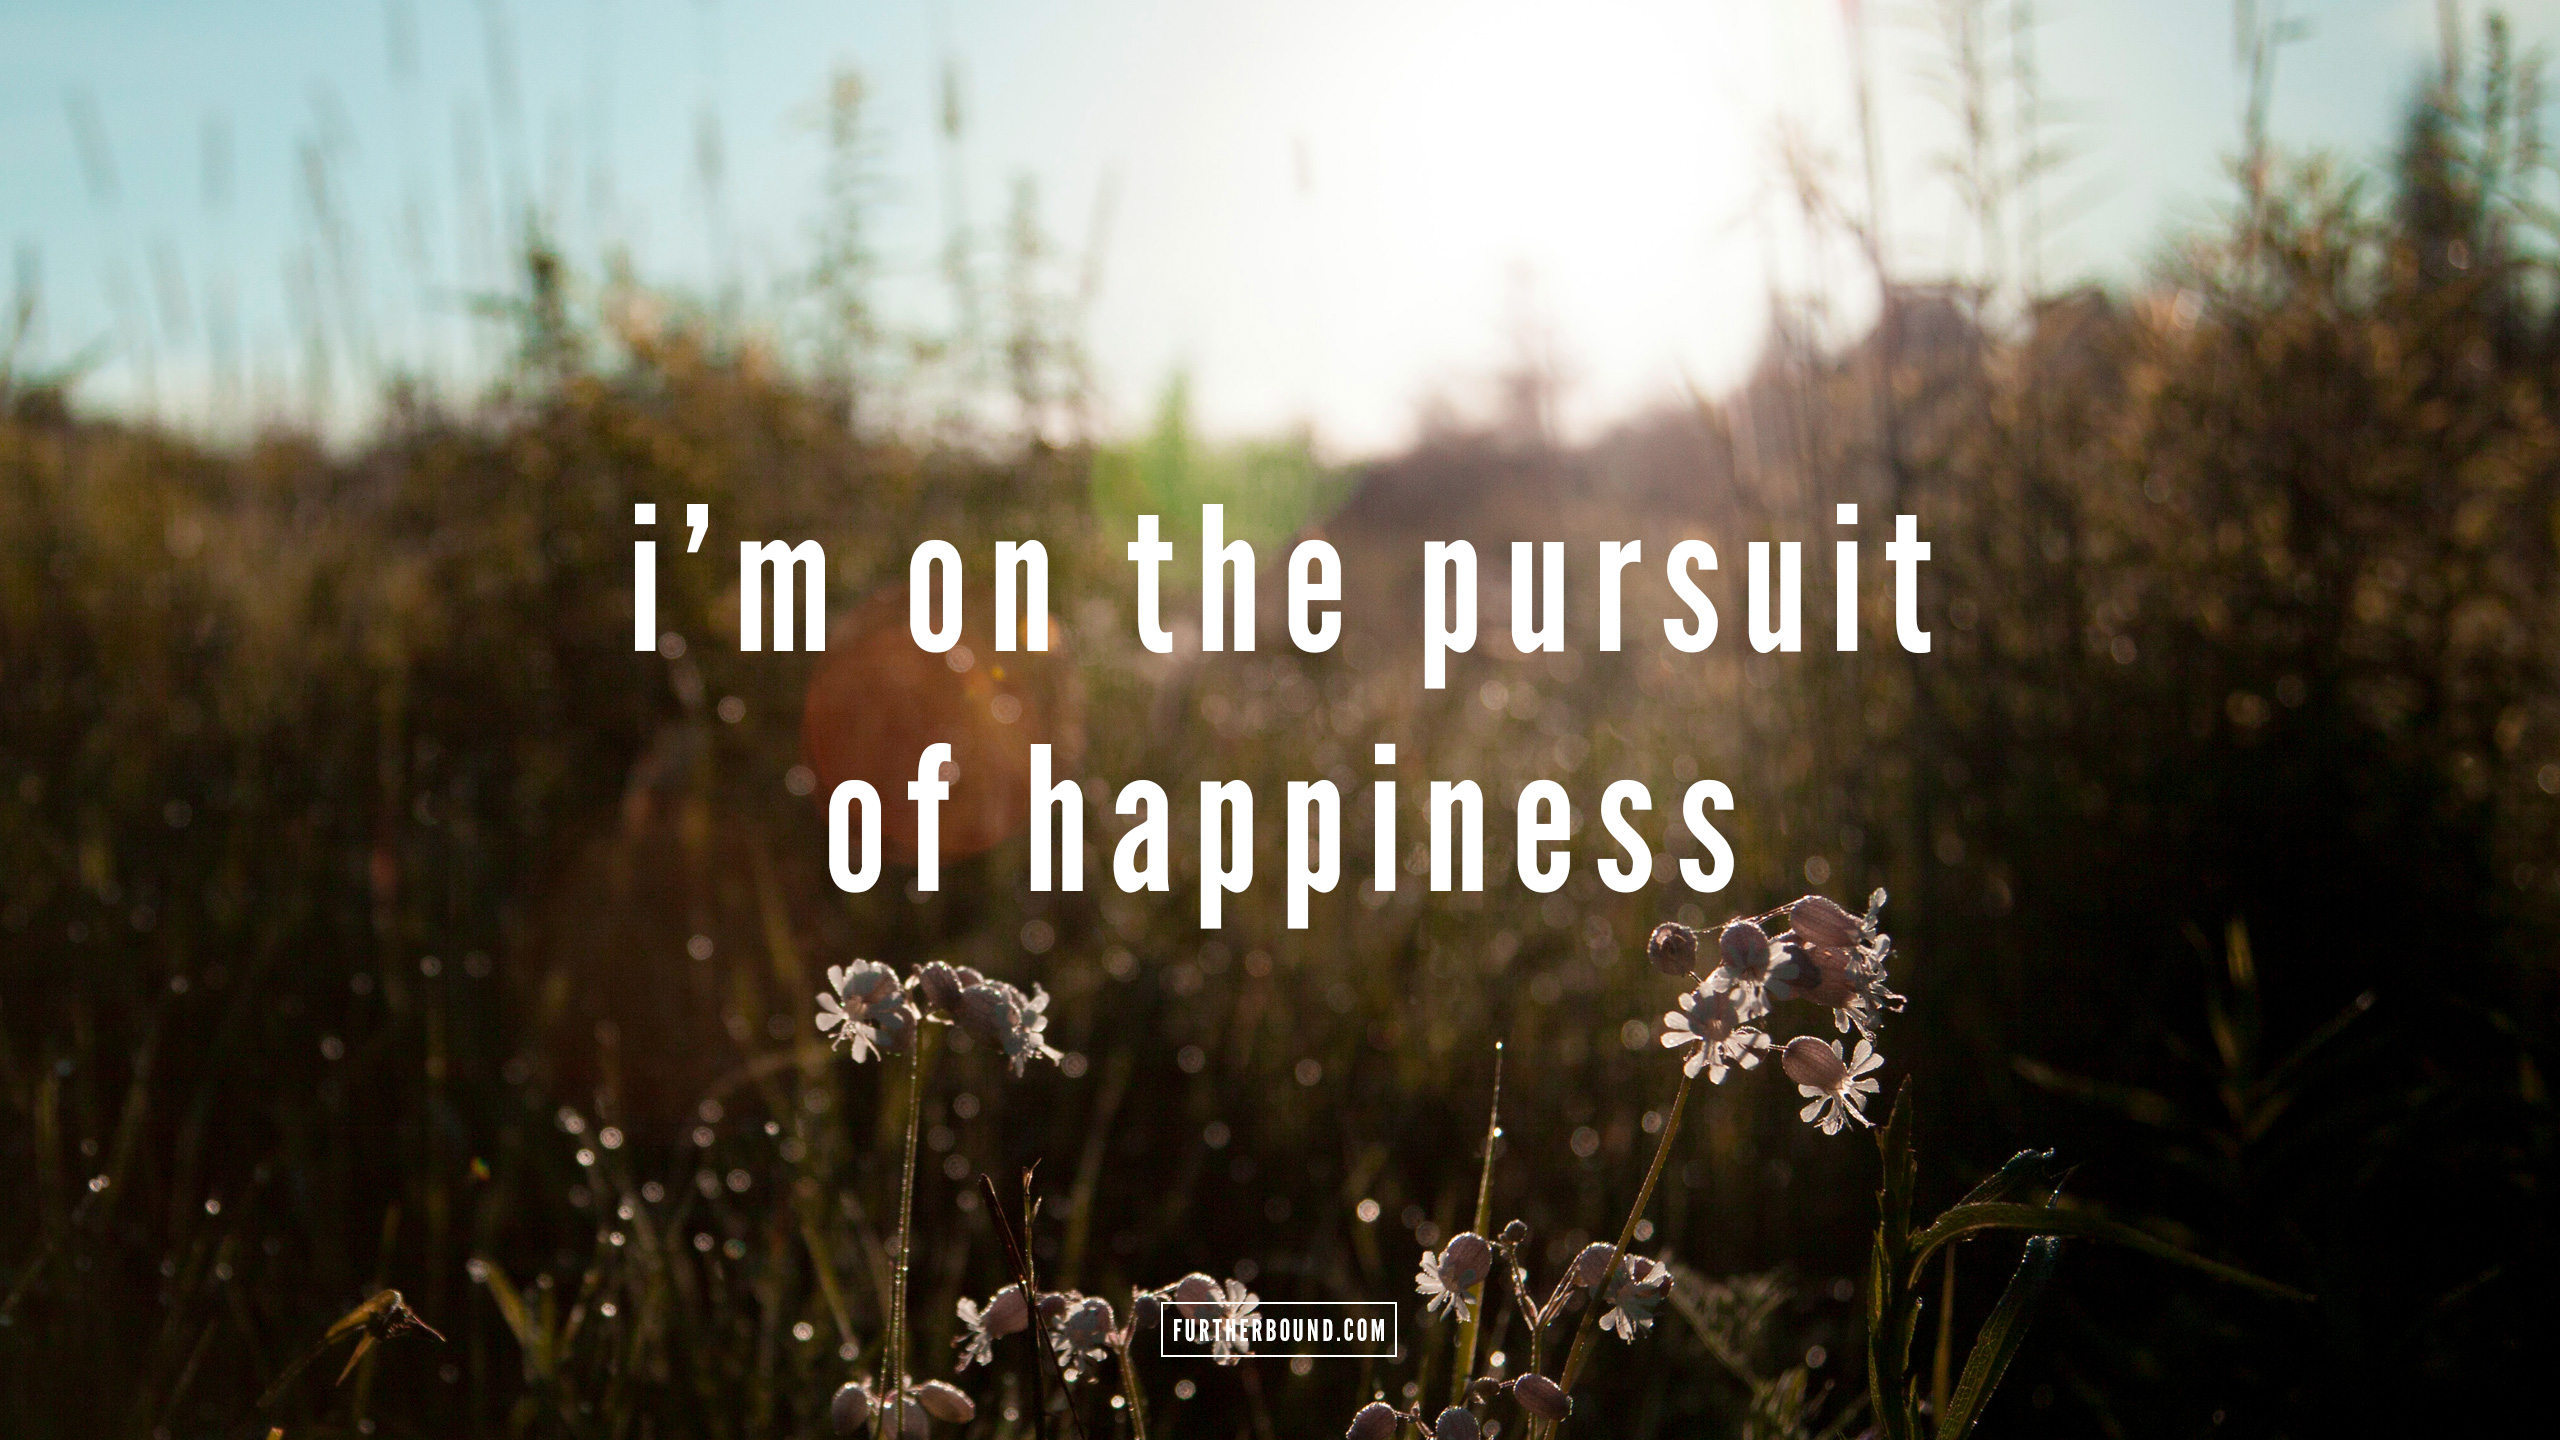  Deep  Quotes  Pursuit Of Happiness  QuotesGram